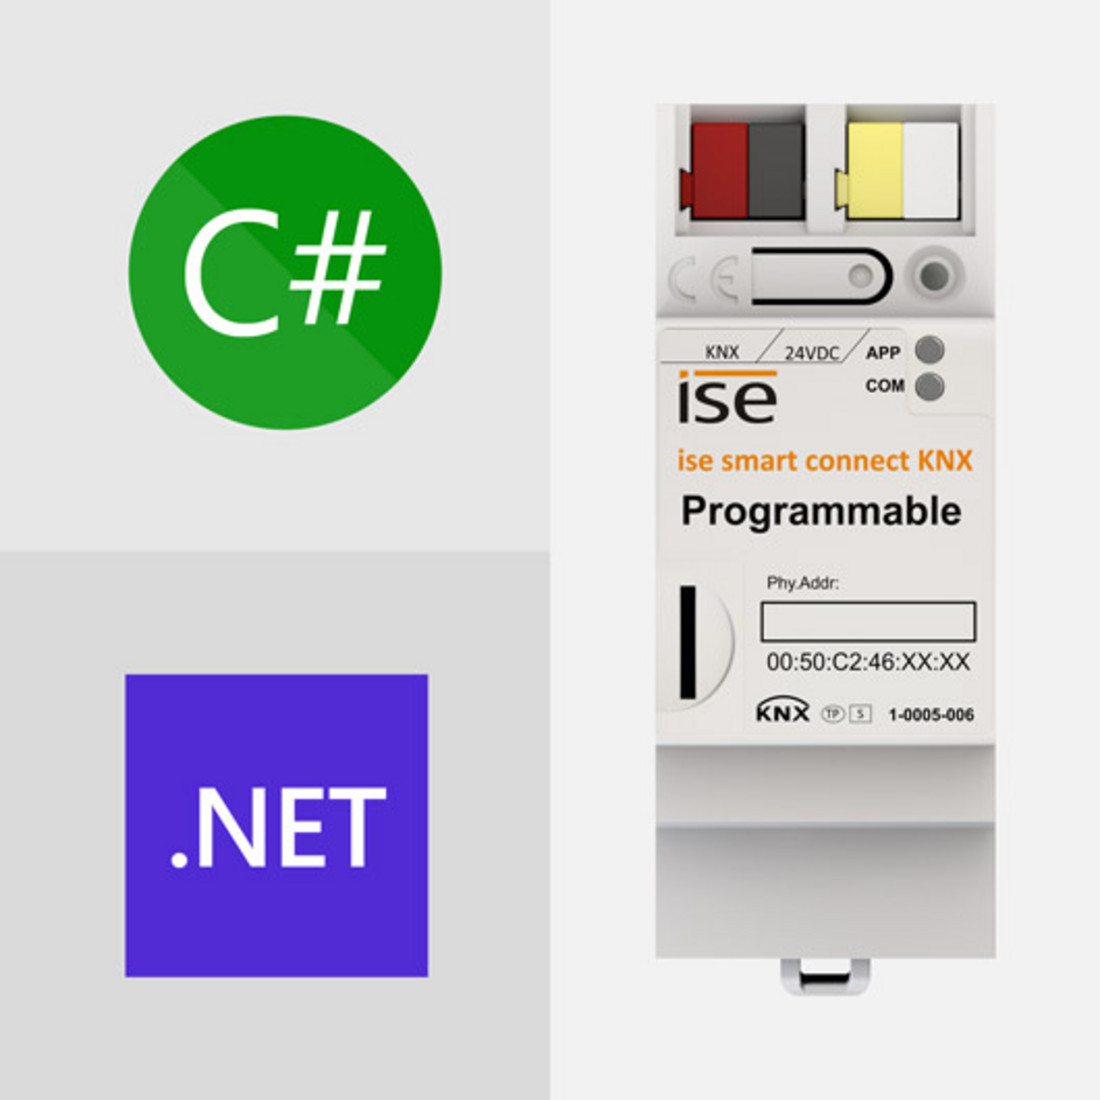 SMART CONNECT KNX Programmeble